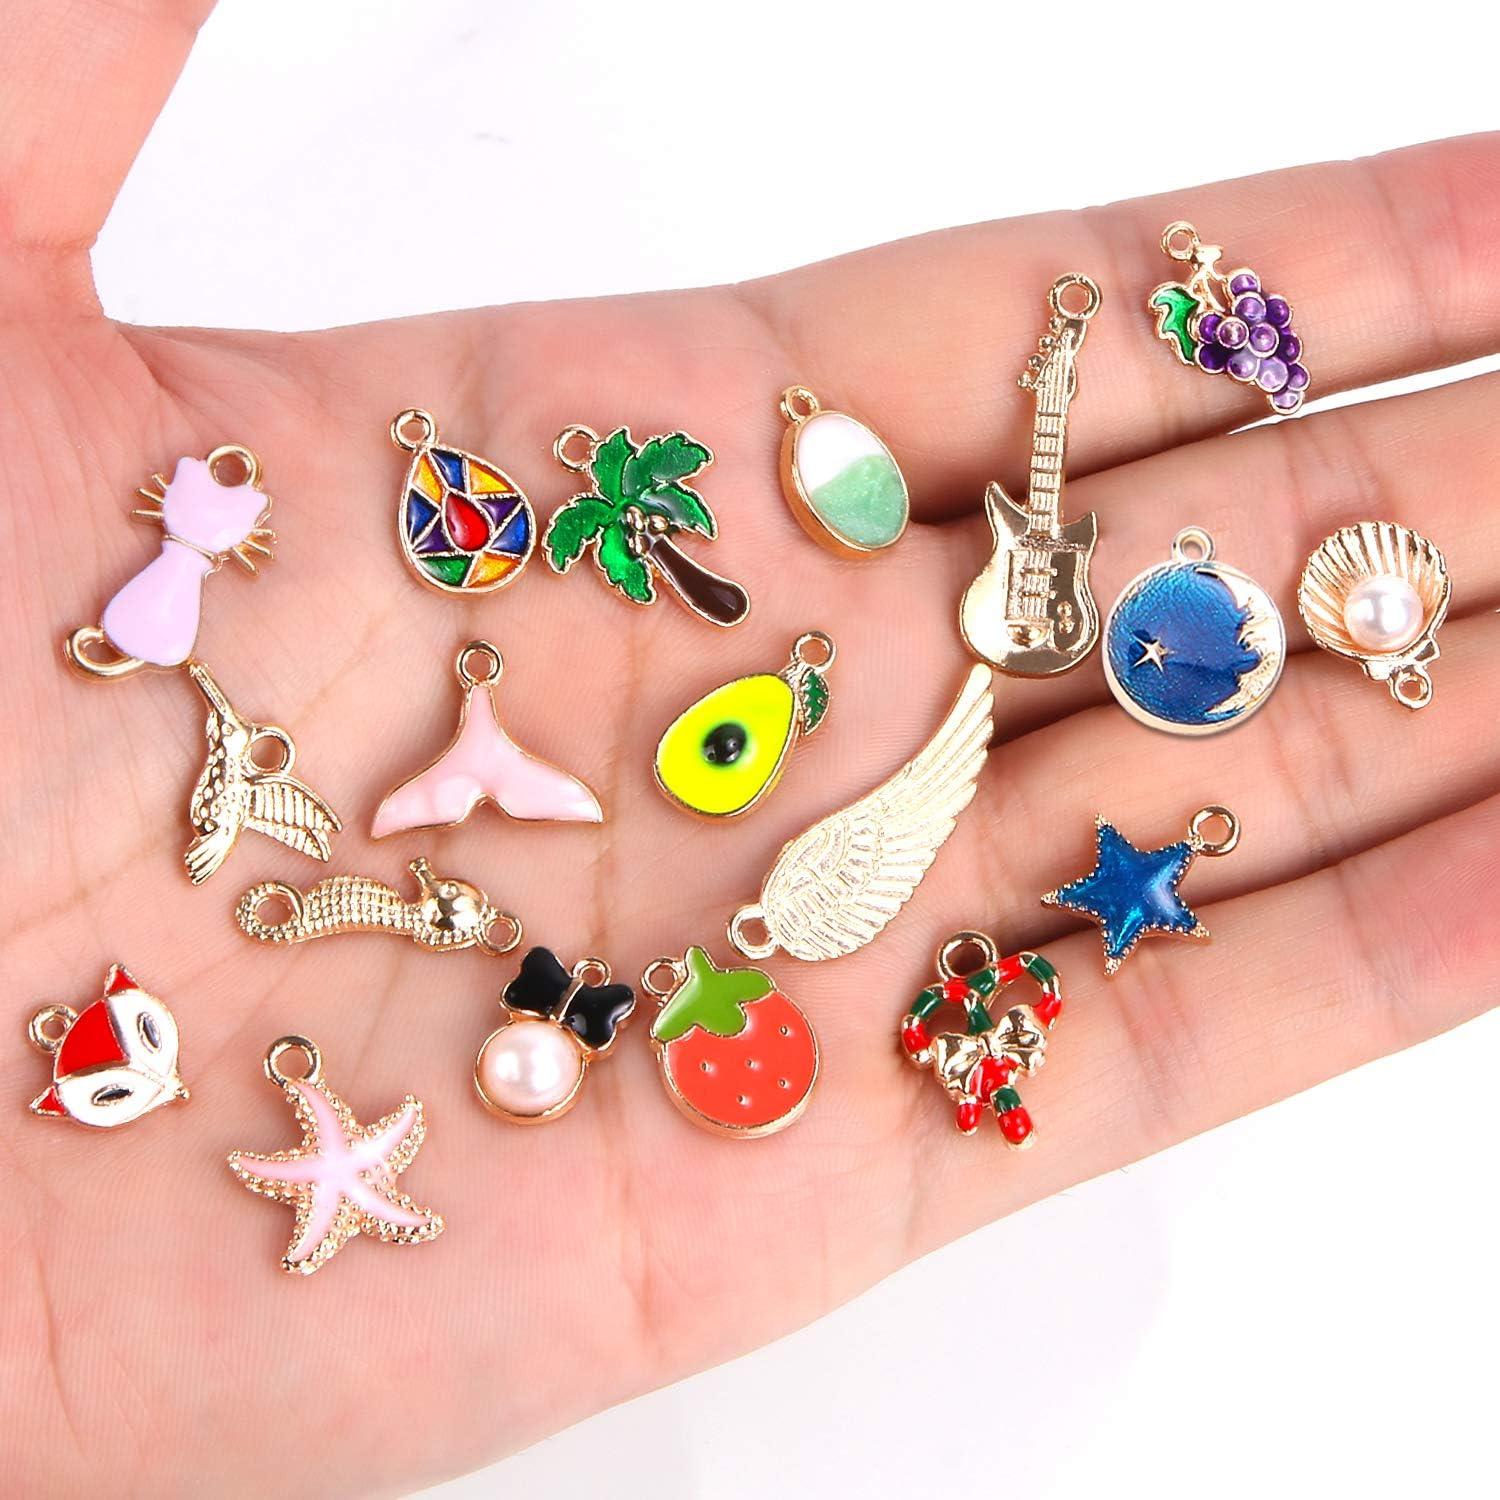  Techinal 9 Color Flower Alloy Charm DIY Charm Jewelry Pendants  for DIY Bracelet Necklace Jewelry Making Findings Accessories Jewelry  Findings for Making Jewelry Earrings Bracelets : Arts, Crafts & Sewing